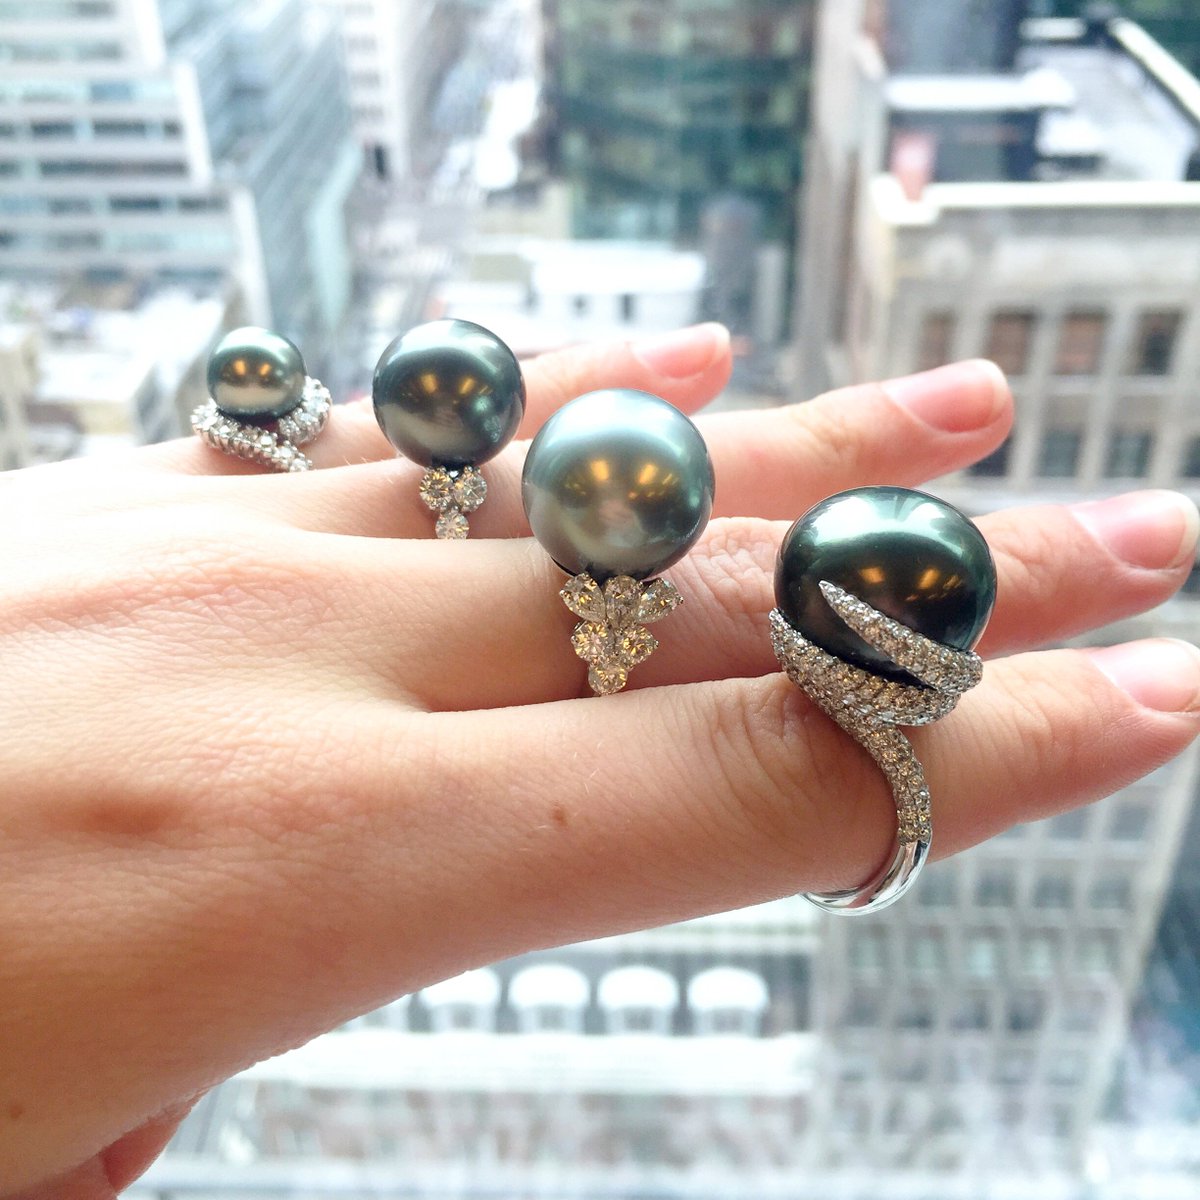 A #ringstack for the ages. 💍💍💍💍 #TahitianPearlRings

#MastoloniPearls #Pearls #NYC #PearlJewelry #PearlRings #showmeyourrings #love #beautiful #diamonds #diamondrings #cocktailrings #finejewelry #luxury #perla #perle #stunning #statementrings #statementjewelry